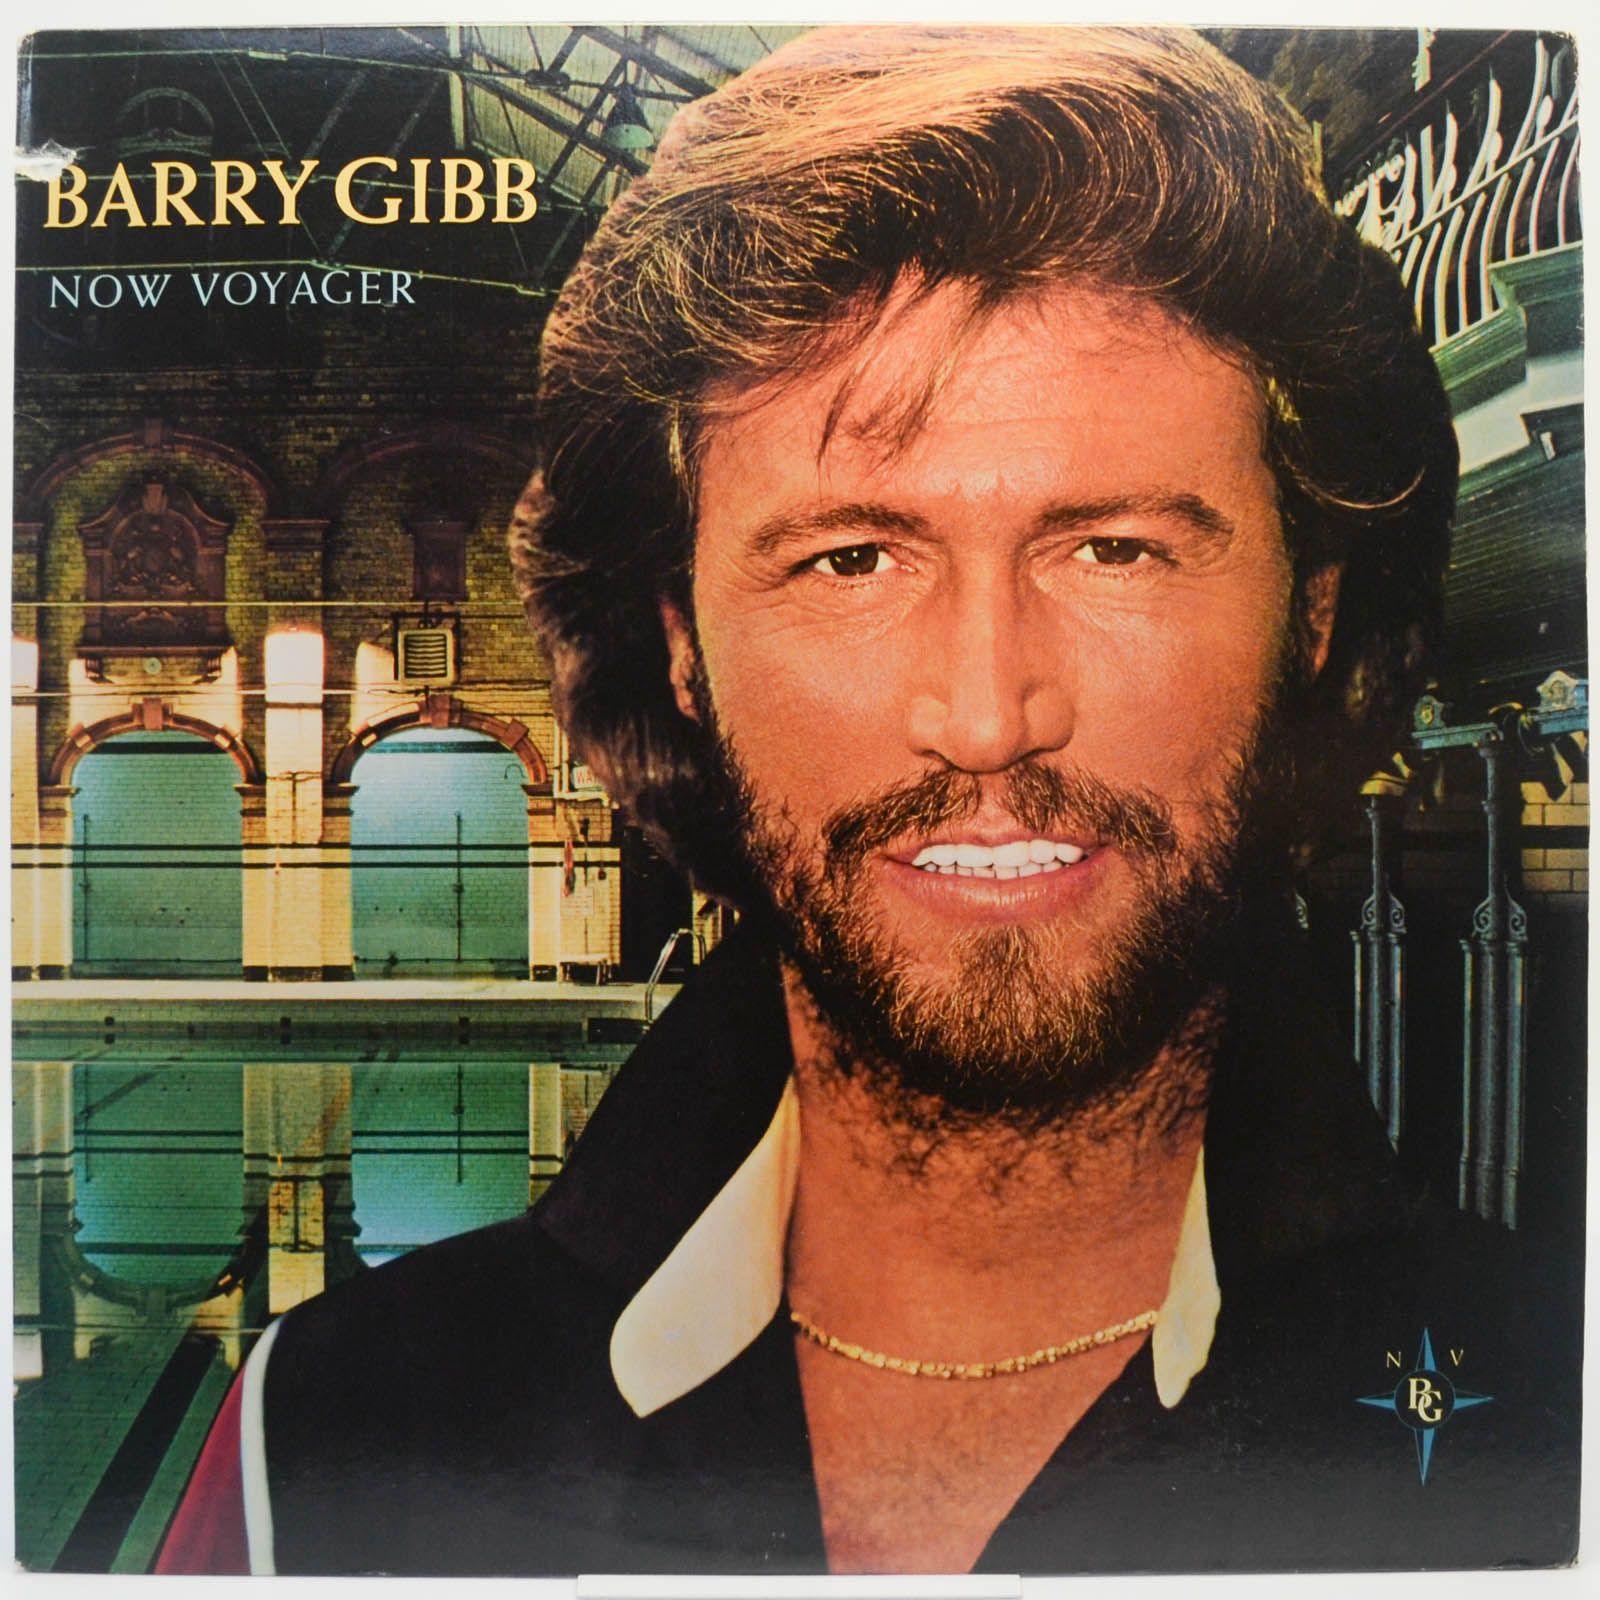 Barry Gibb — Now Voyager (USA), 1984